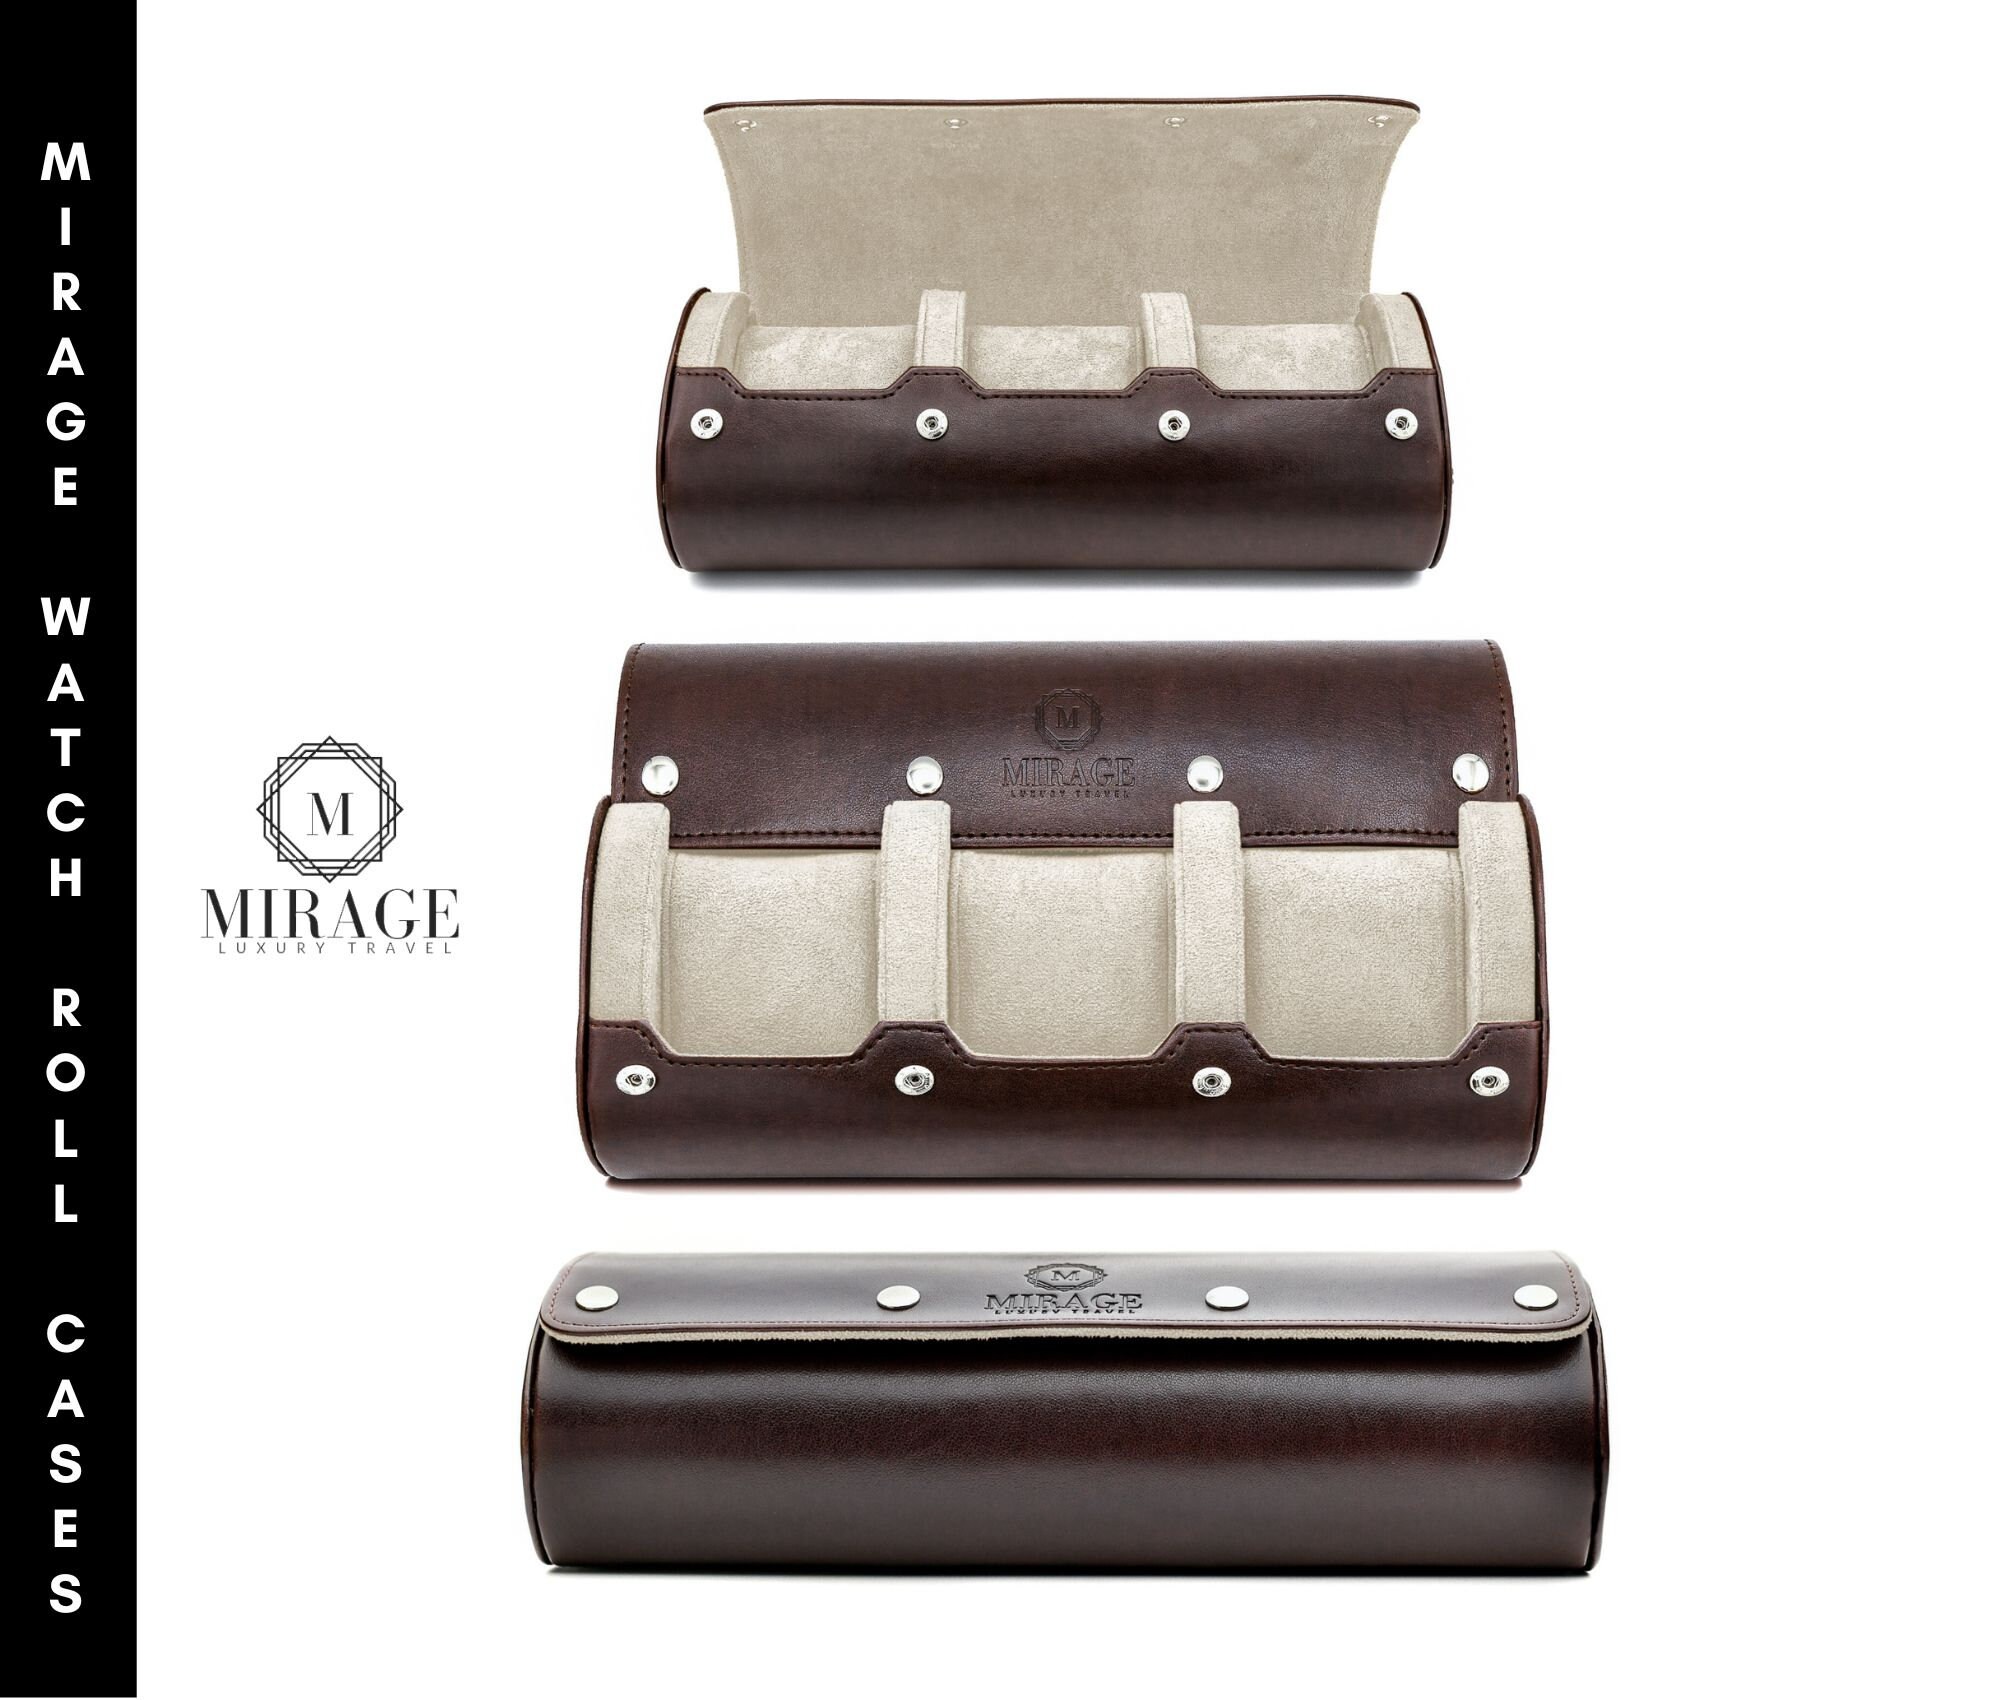 Watch Roll Travel Case Full Grain Leather - 3 Watch Cases for Men - Storage  Organizer and Display - Mirage Watch Rolls